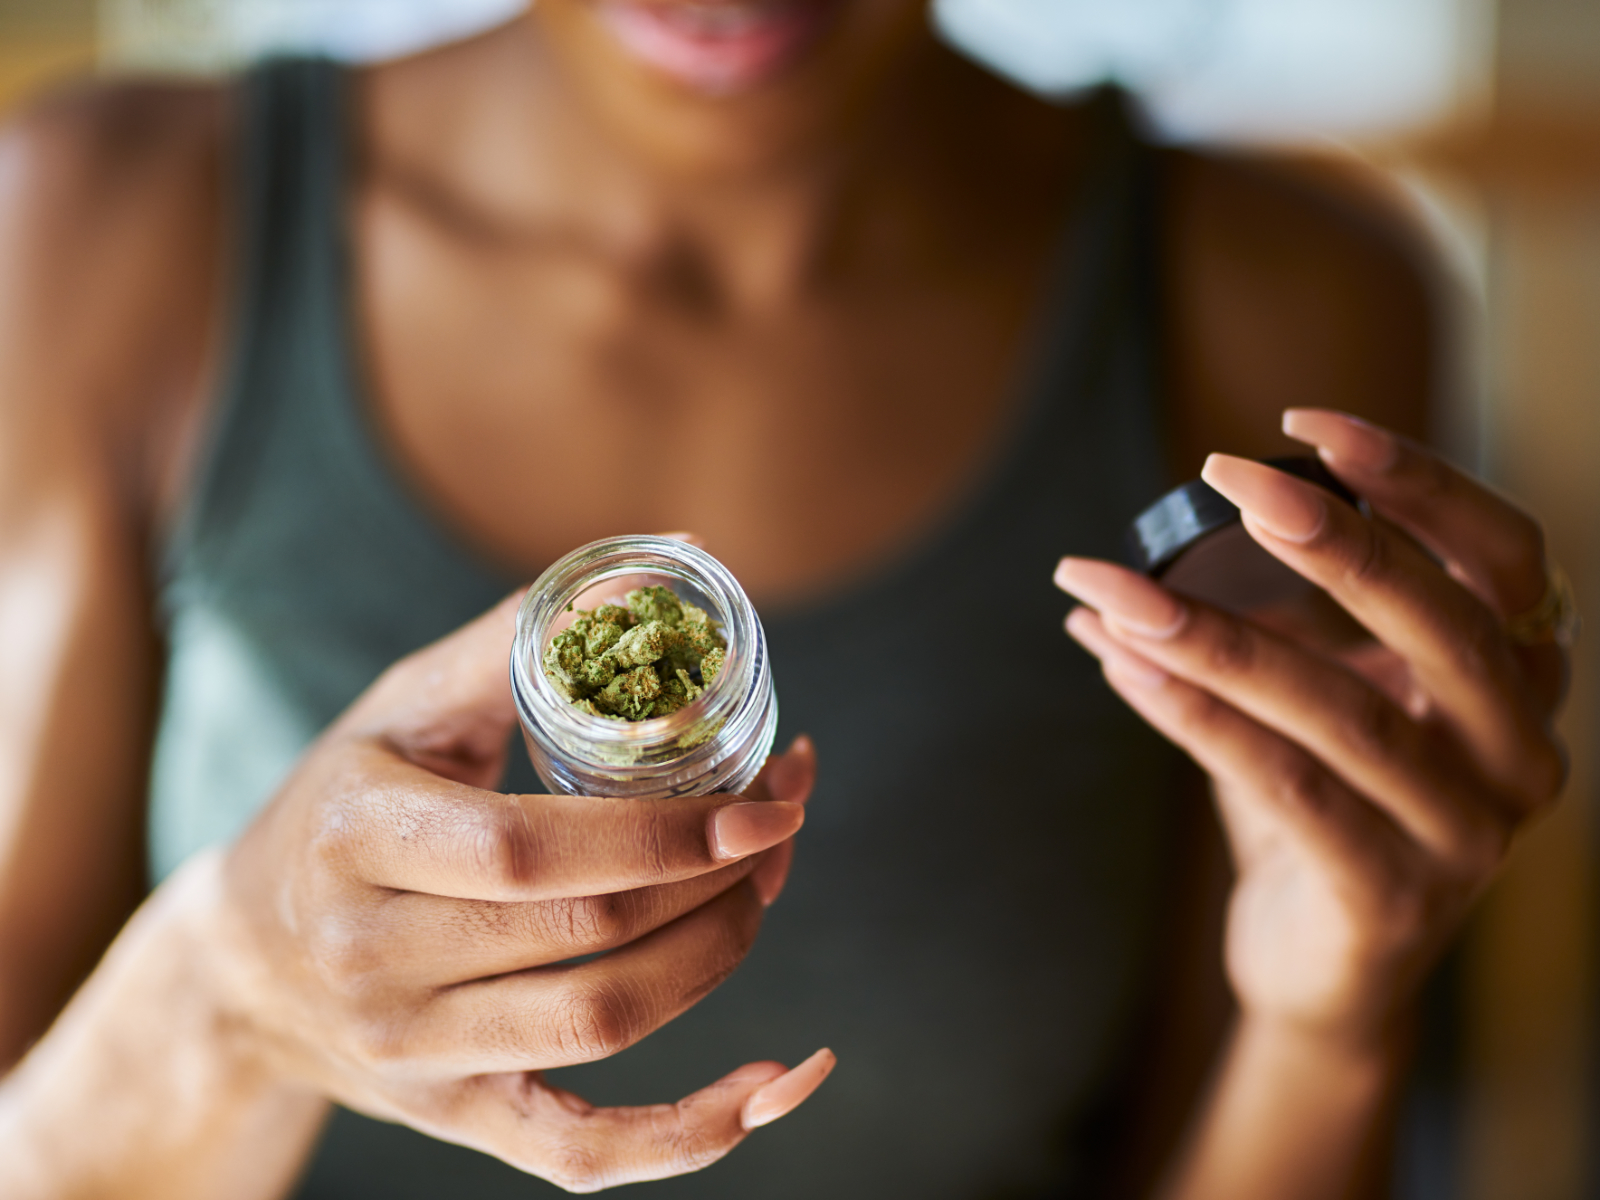 woman holding open container of cannabis